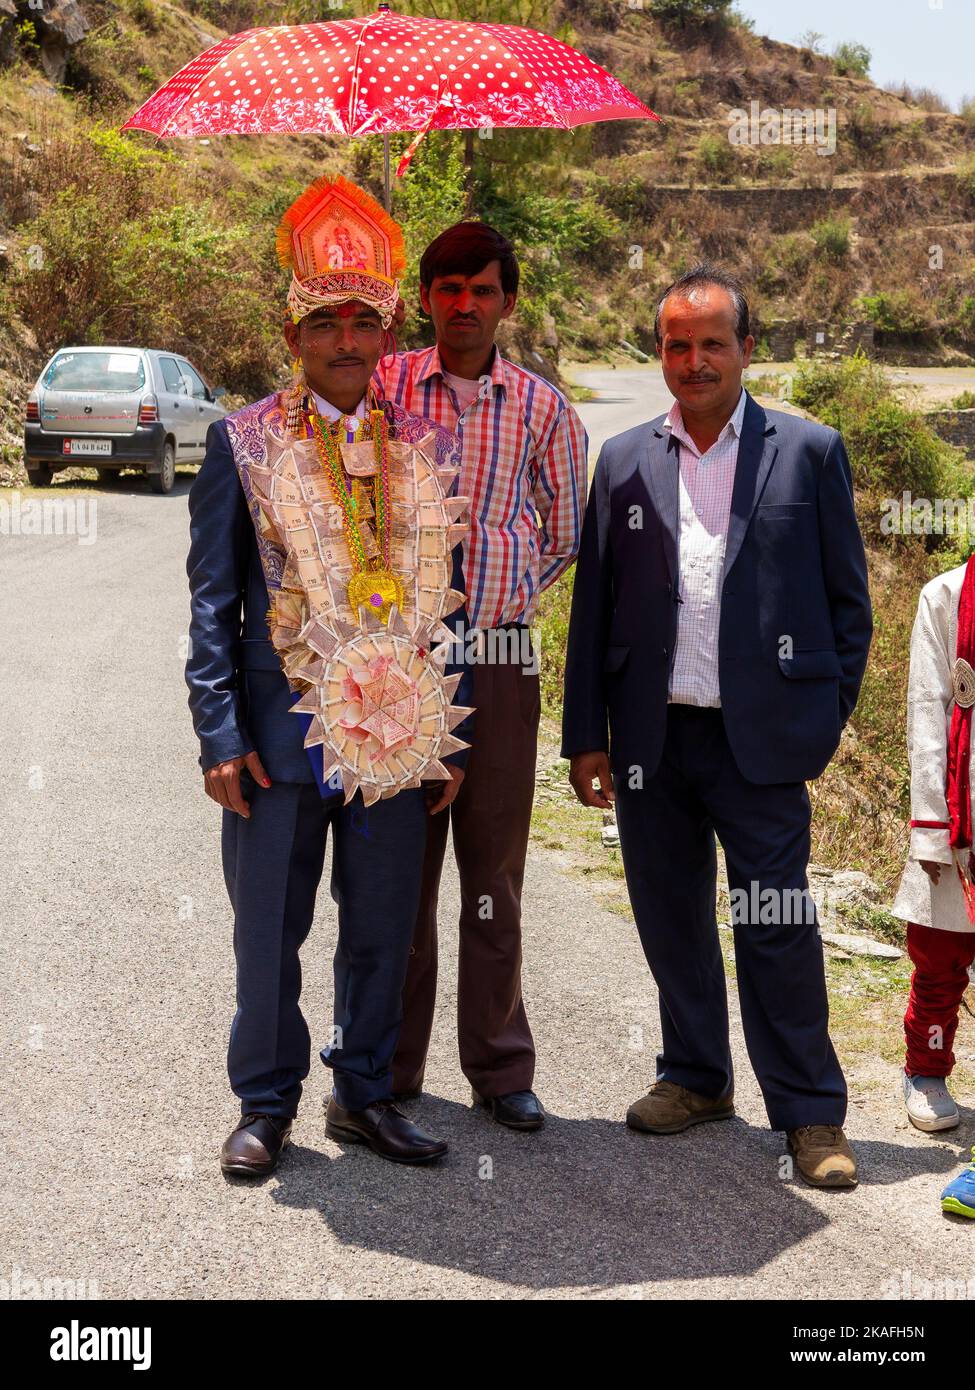 Indian wedding on the road at Adhora village on the Nandhour Valley, Uttarakhand, India Stock Photo